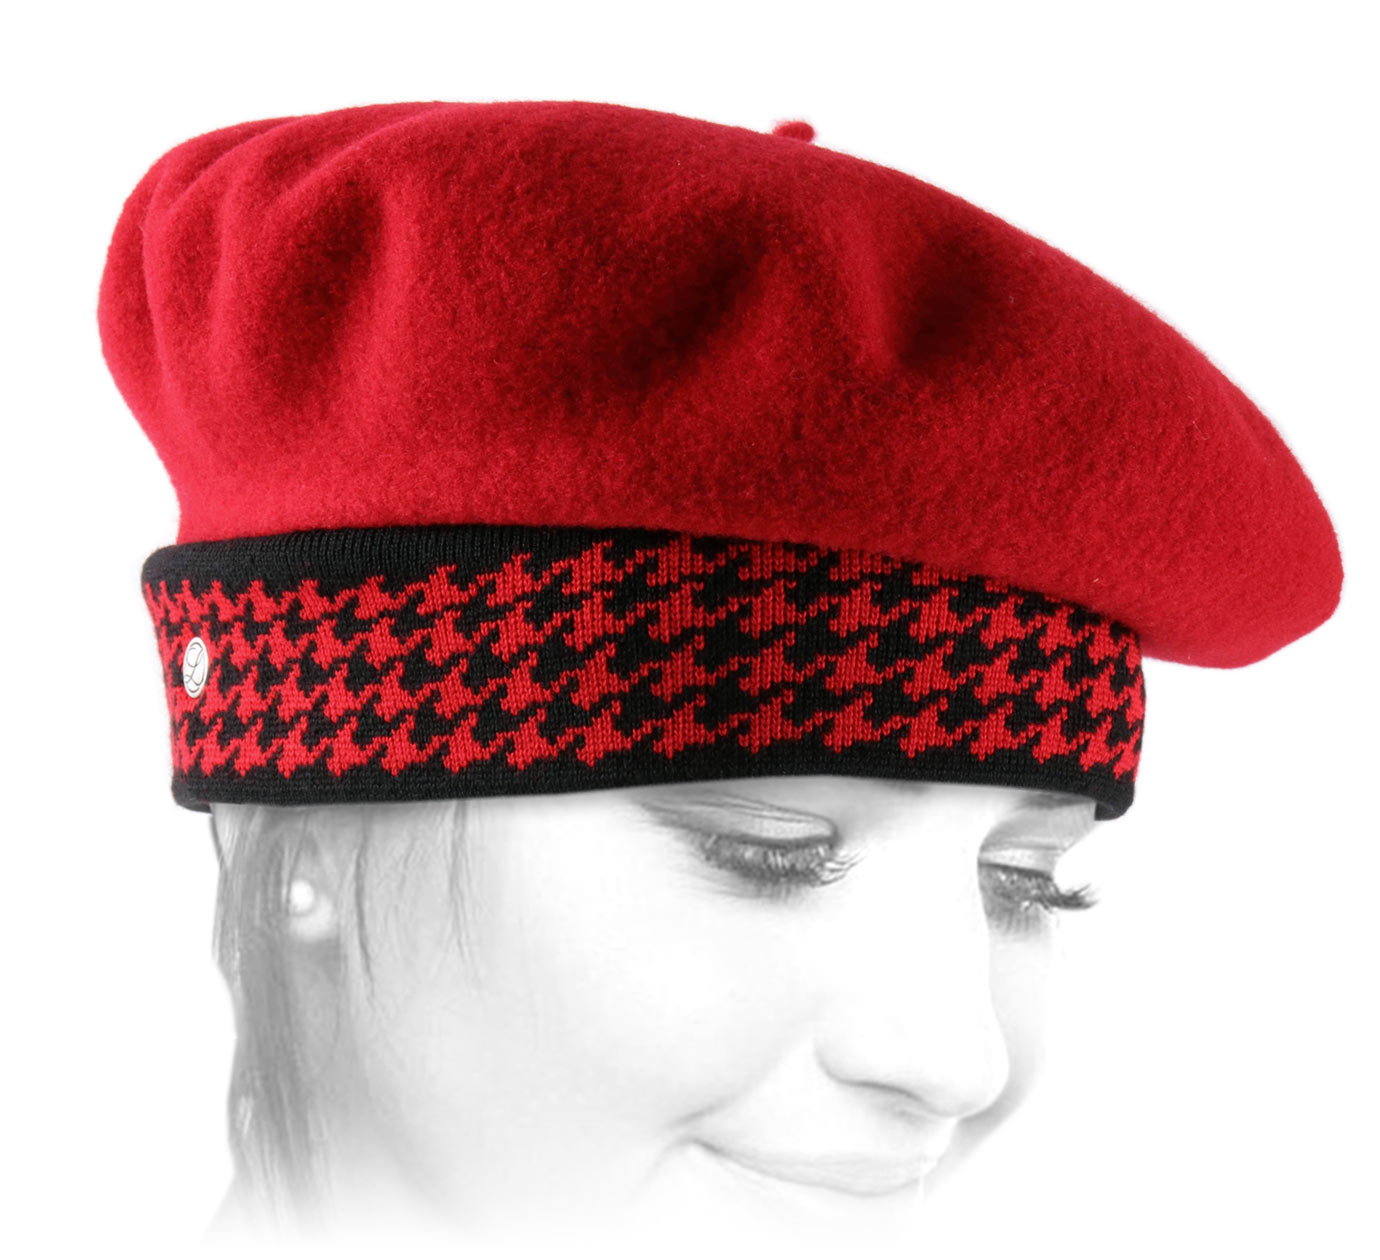 Laulhere Le Basque 100% French Merino Wool Beret 